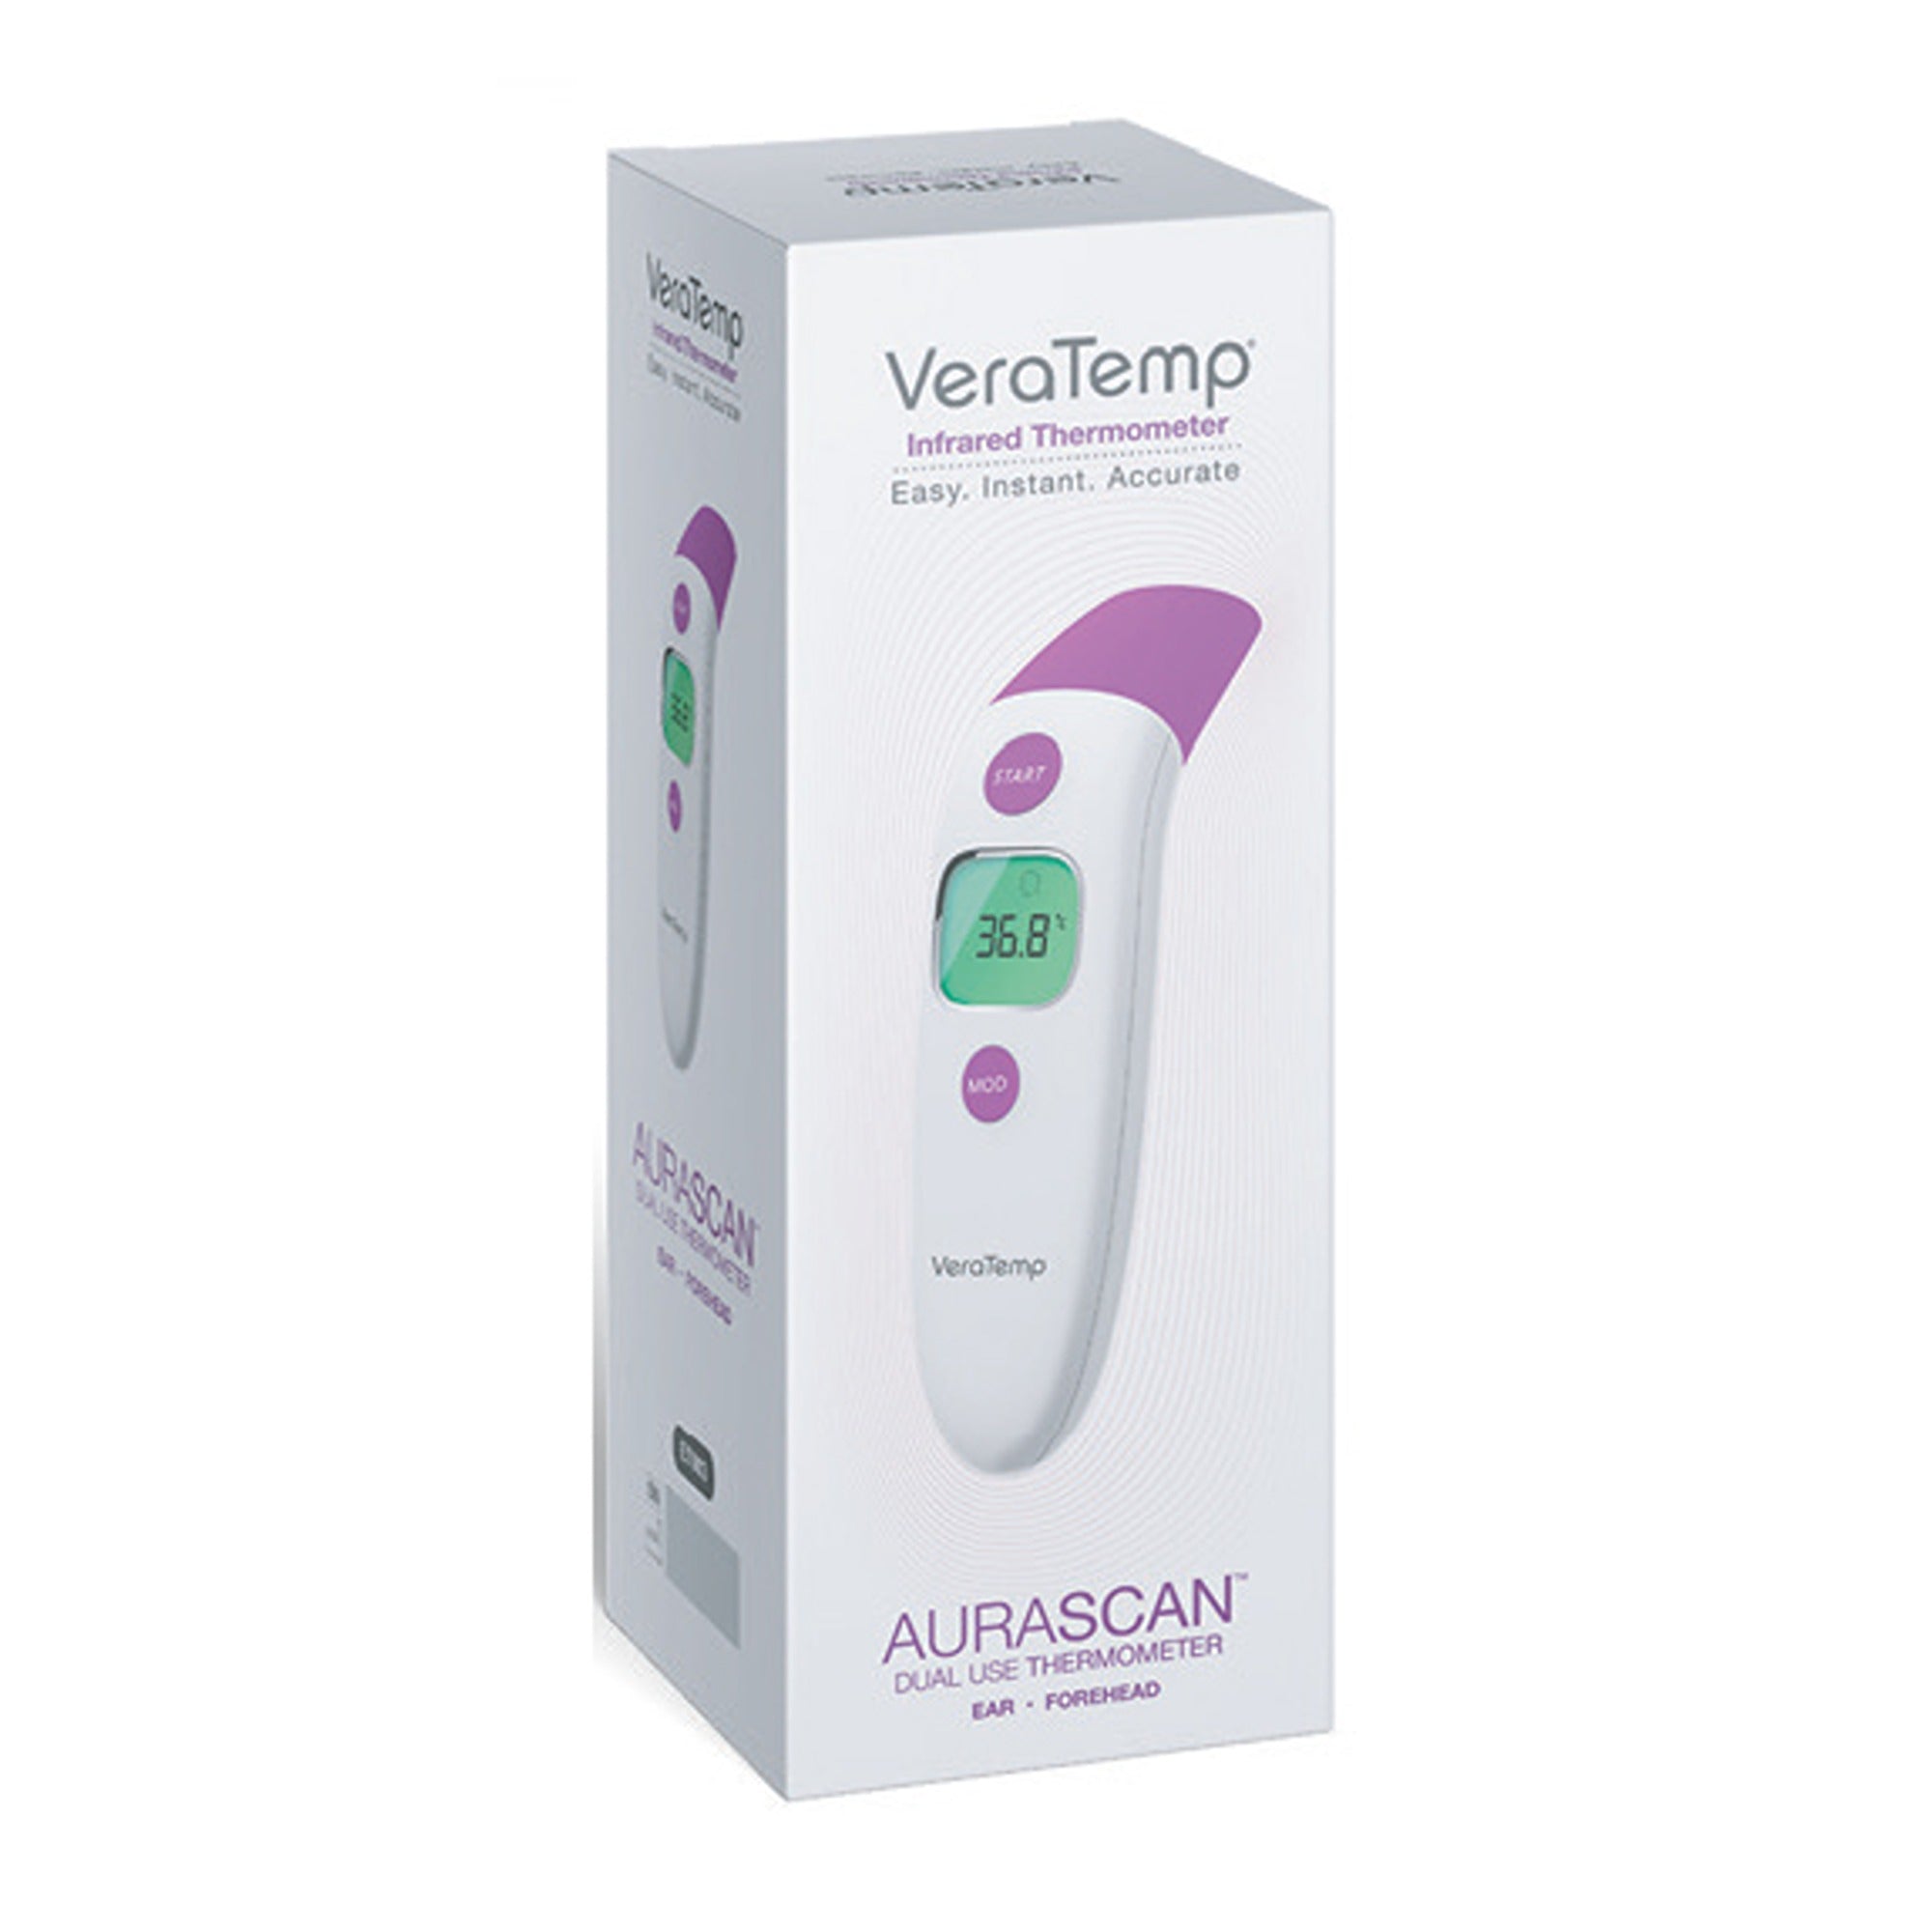 Veratemp Aurascan Dual Use Thermometer